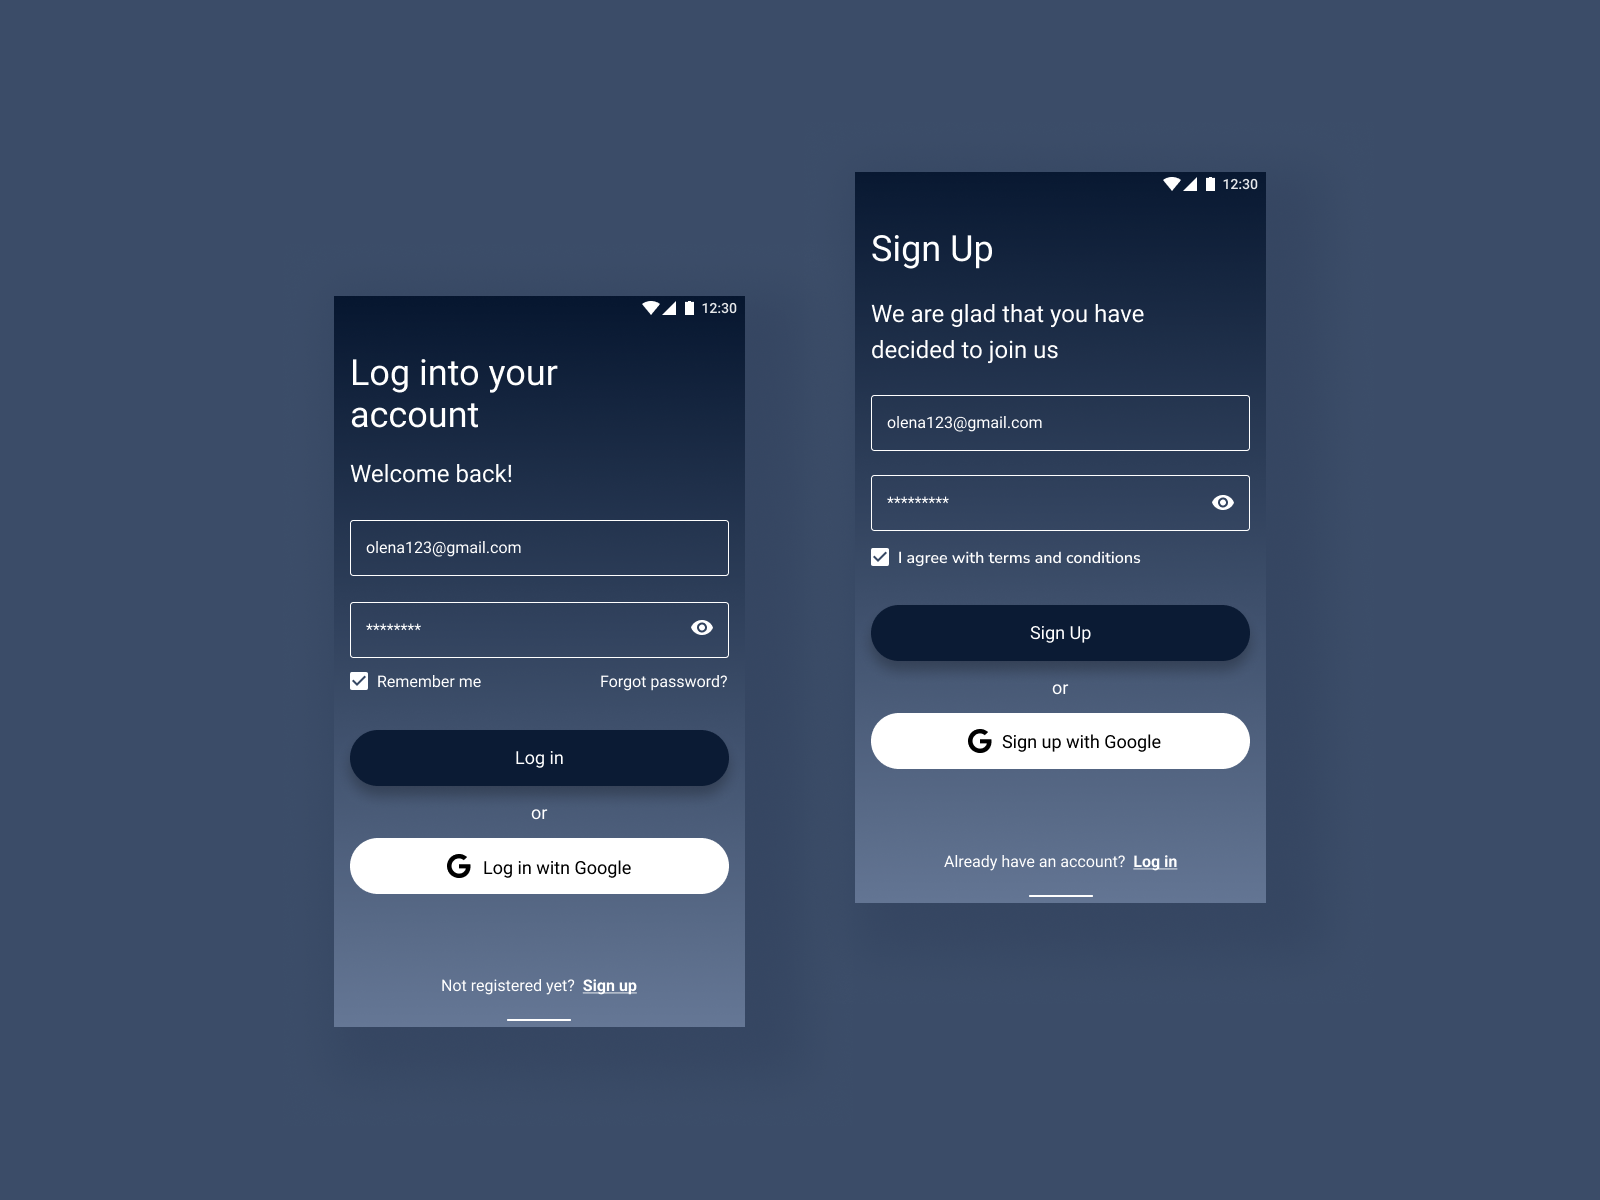 Login and Sign Up pages for Android by Olena Kovalenko on Dribbble